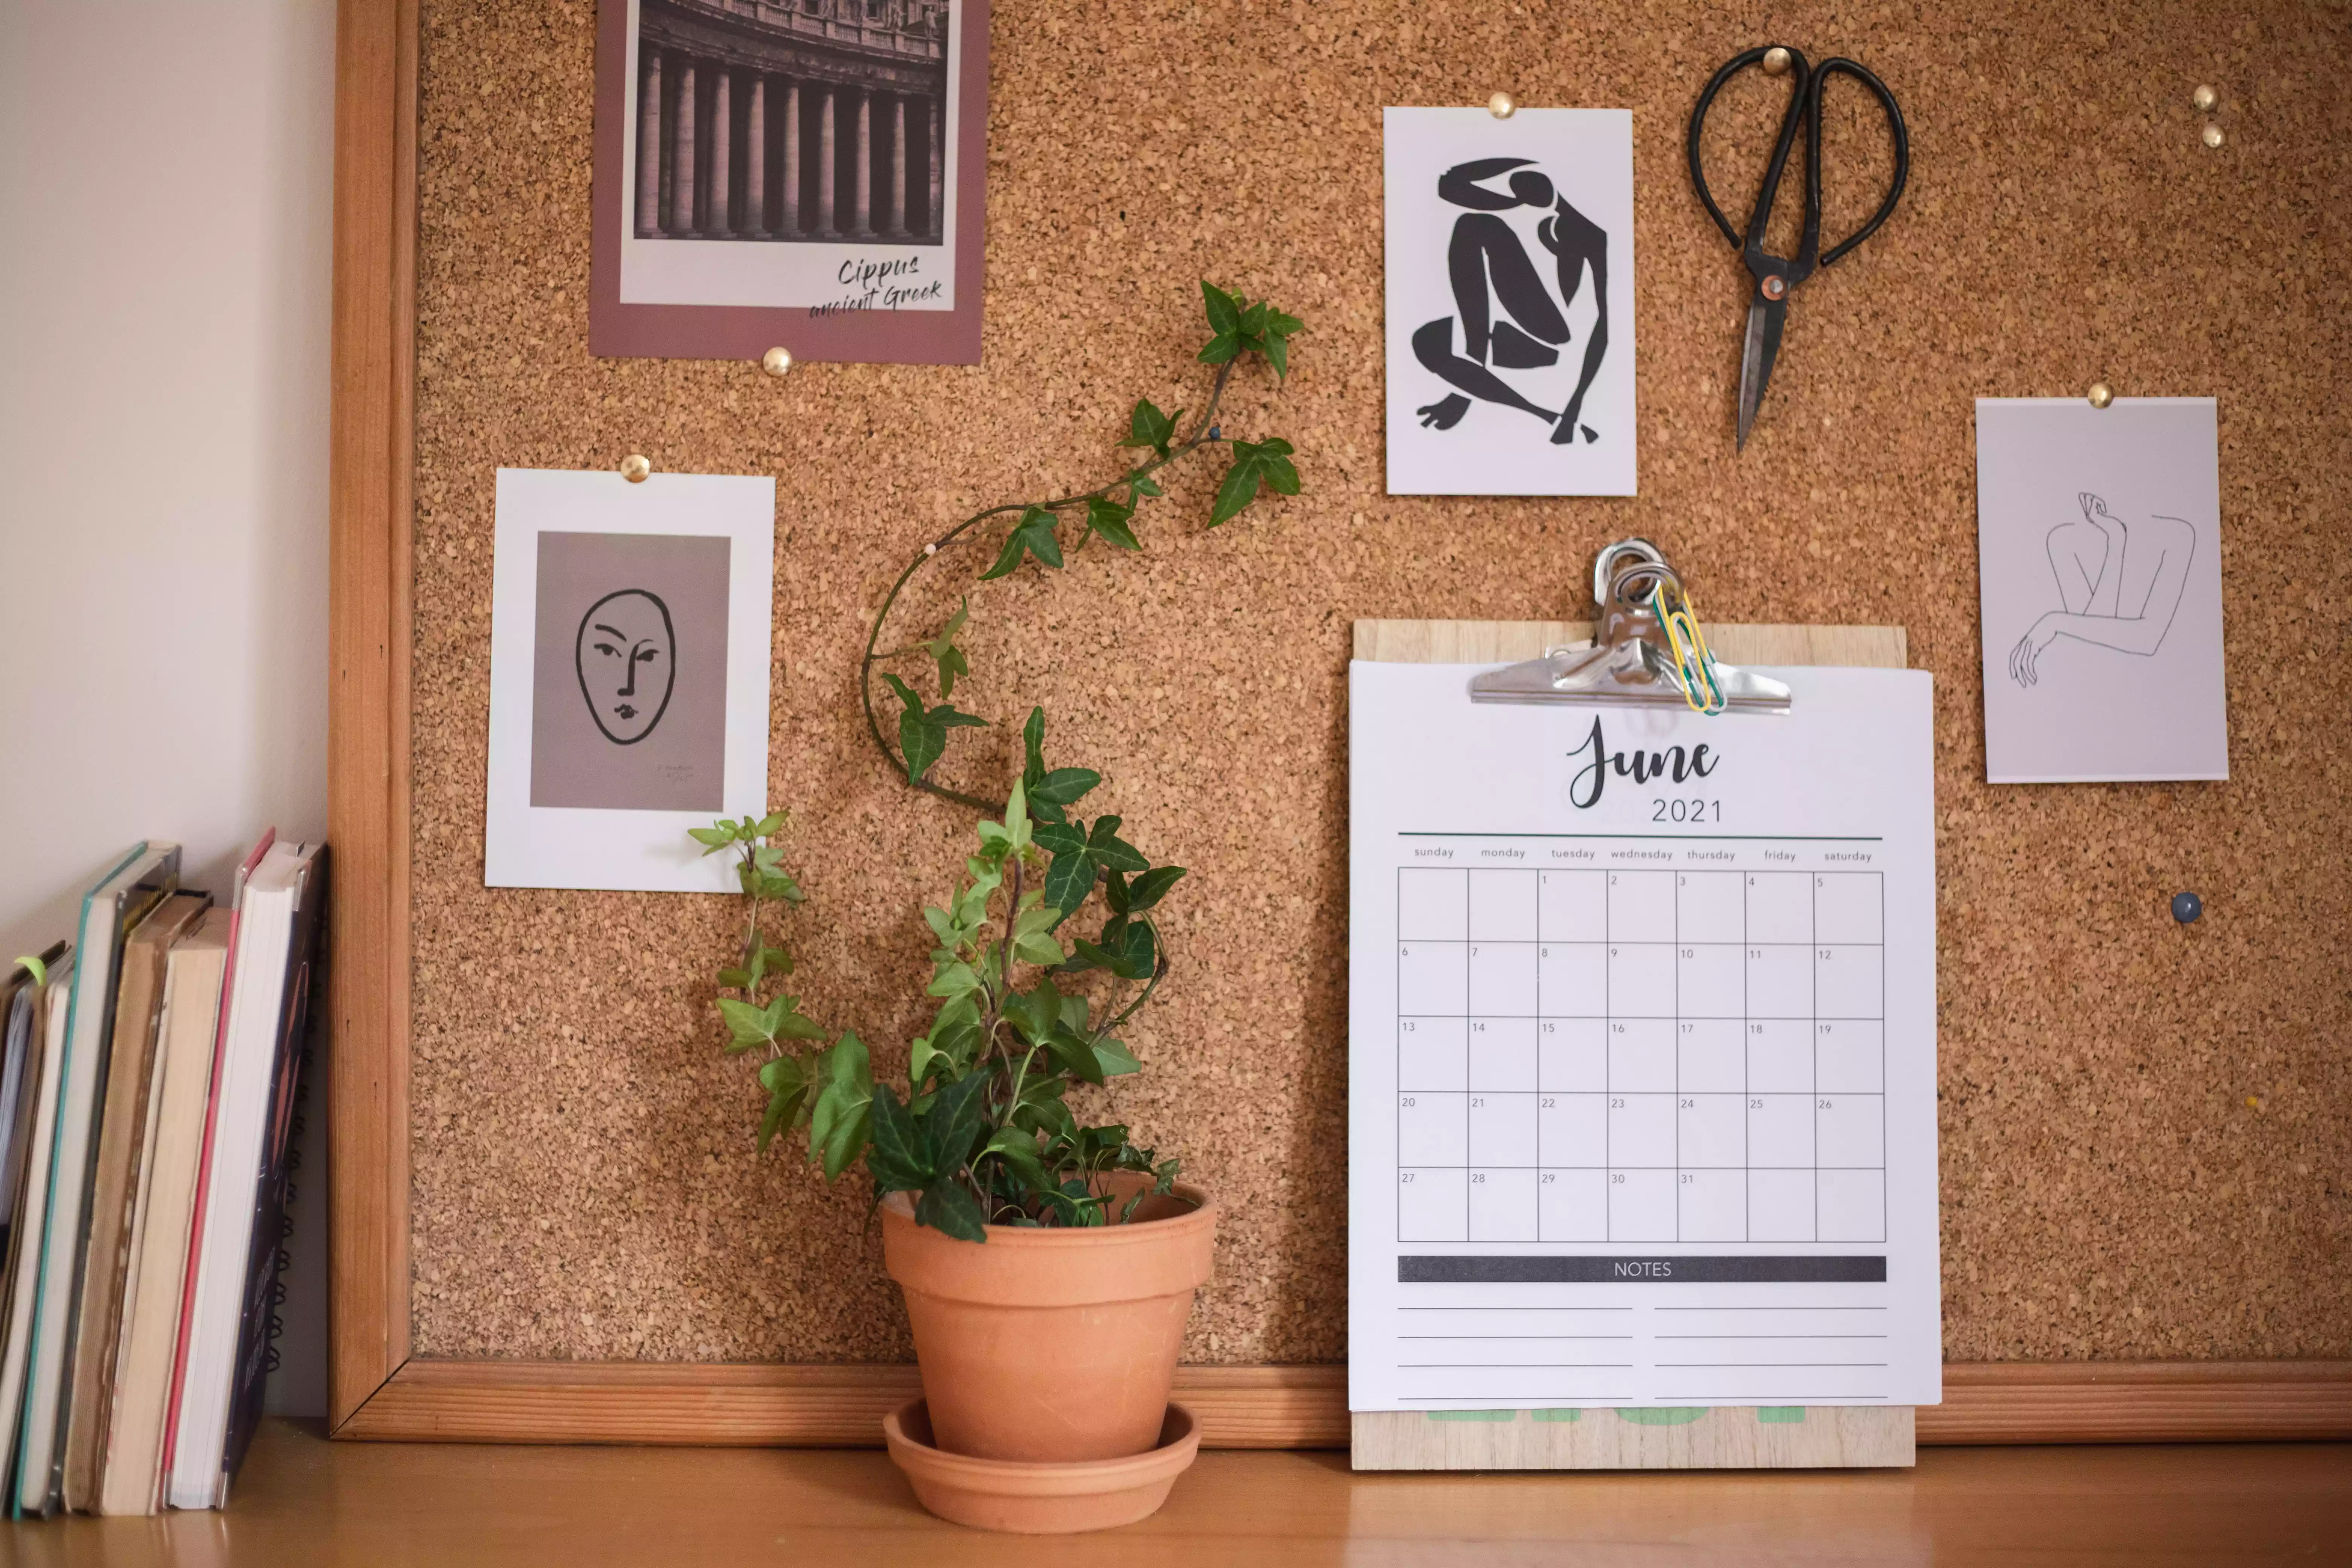 ivy houseplant trained to climb up a cork board pinned with various art